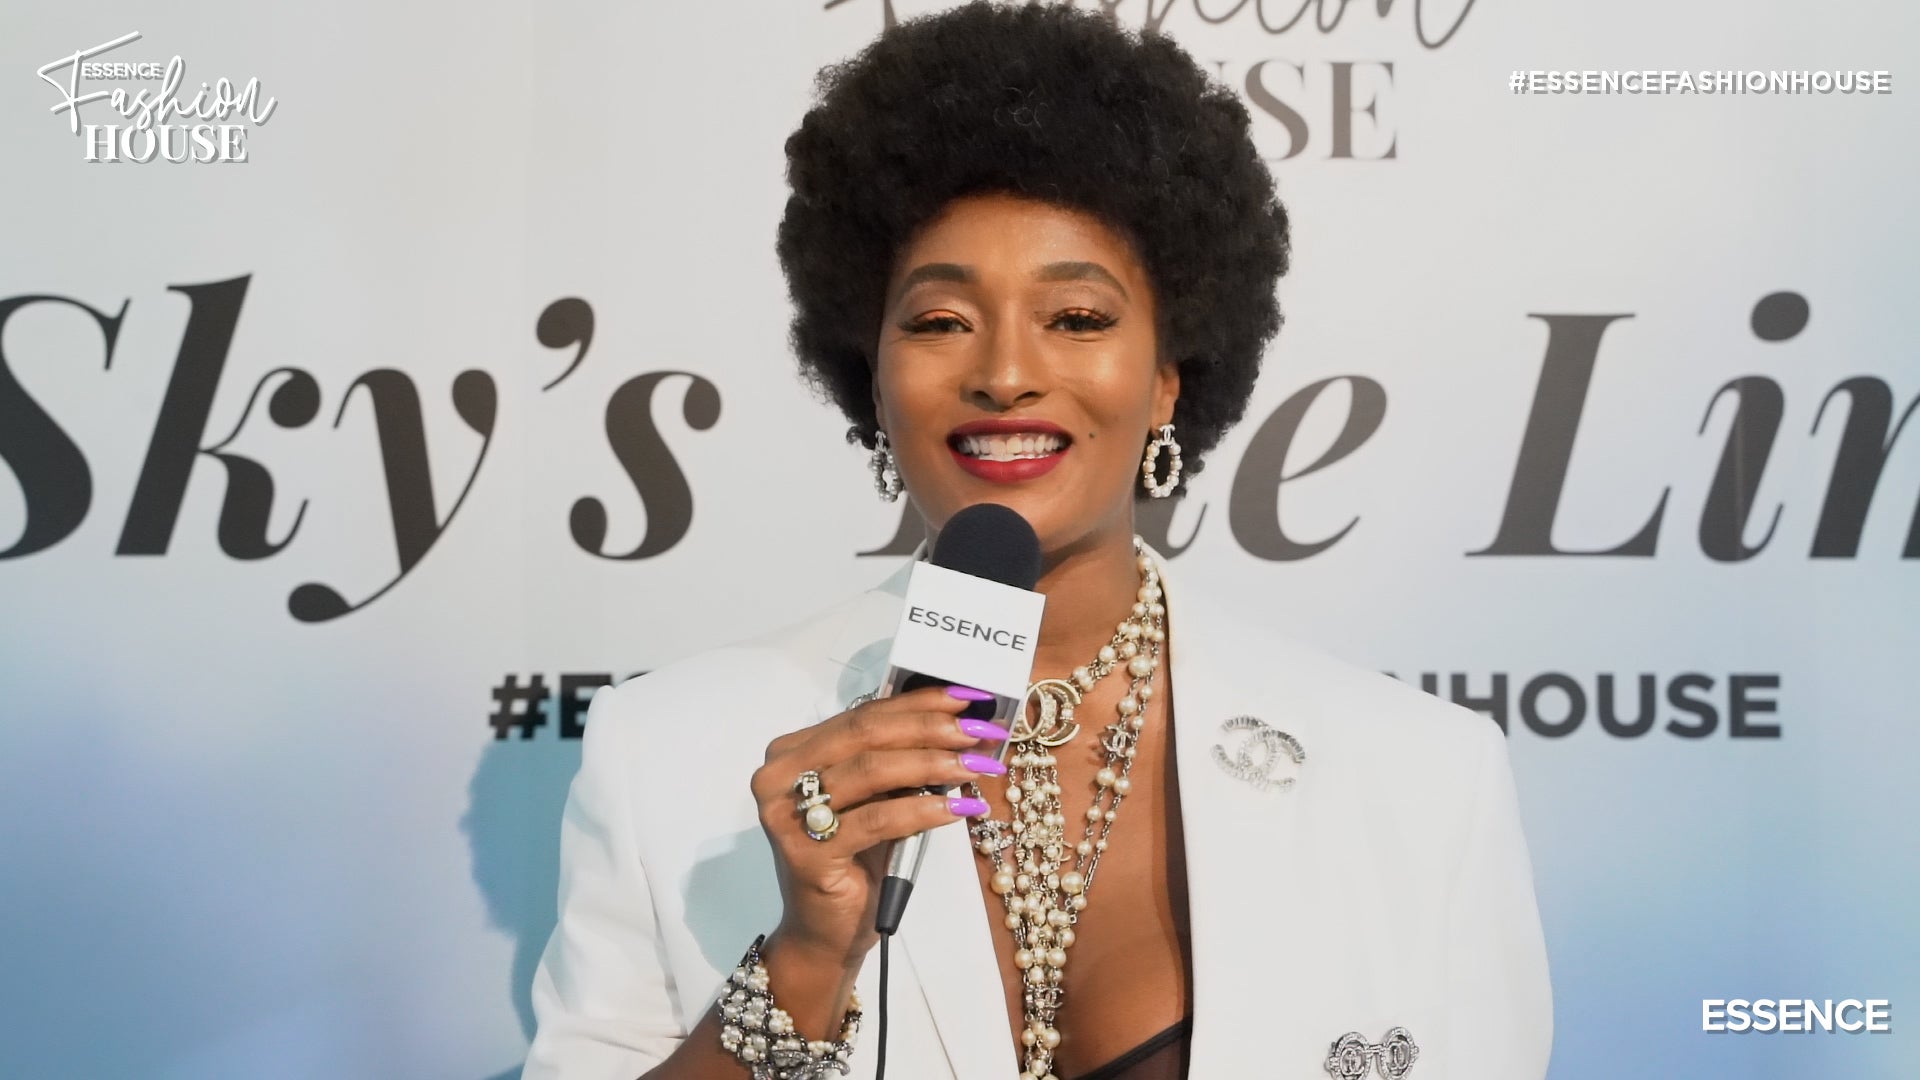 Black Actresses, Models, and Designers Hit The ESSENCE Fashion House Red Carpet